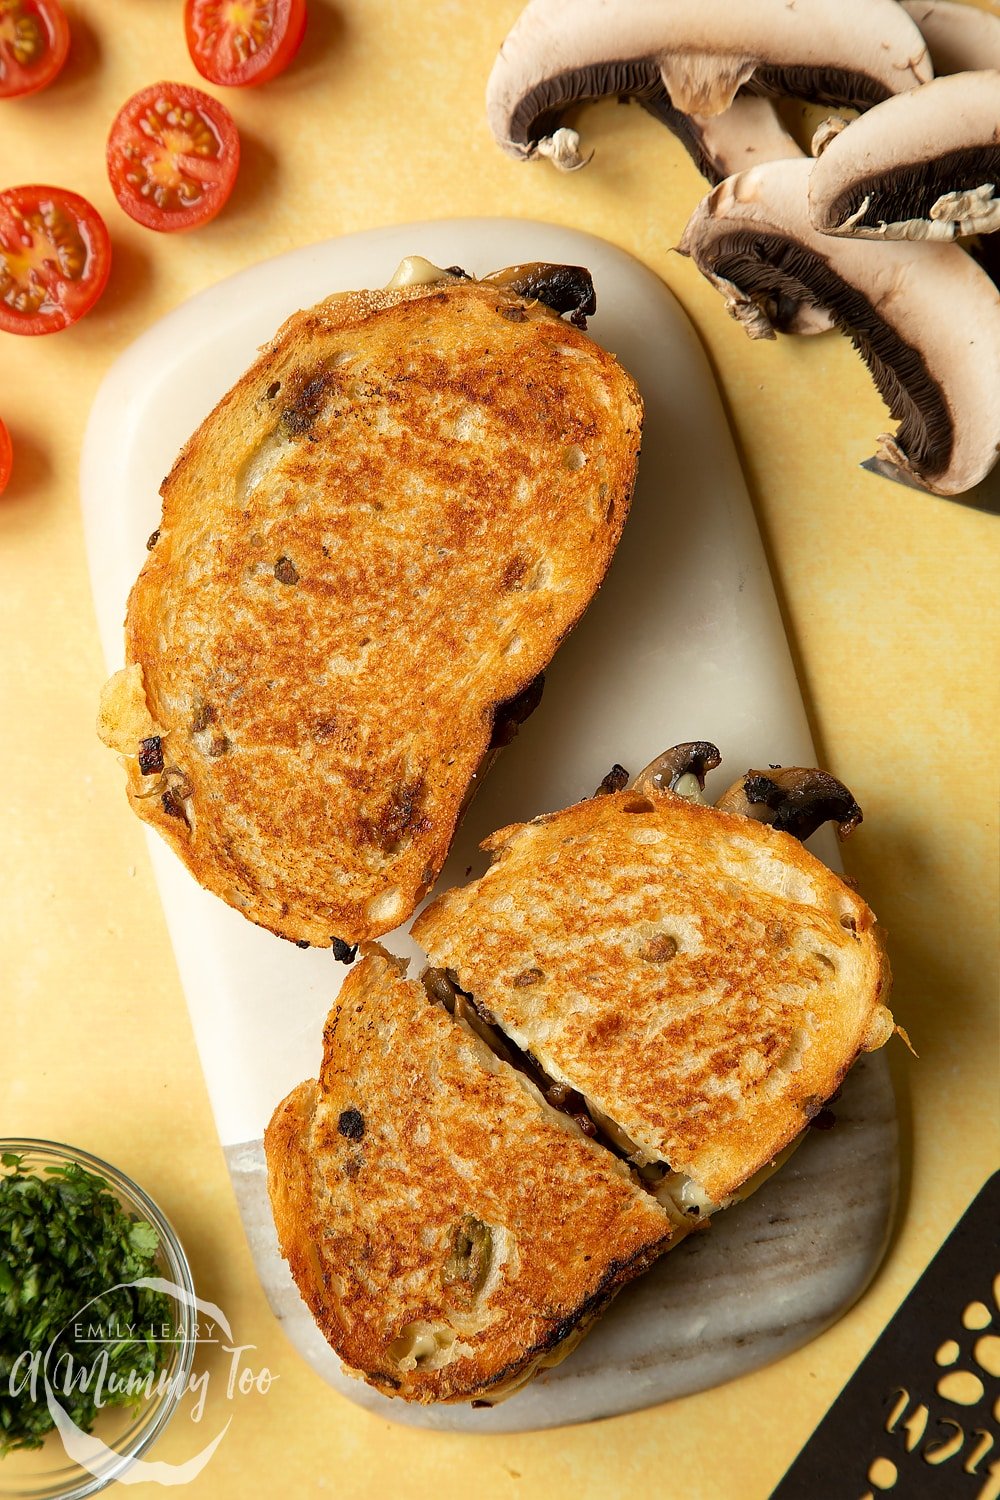 Two Jarlsberg cheese and mushroom toasties are on a serving board, one is cut in half.